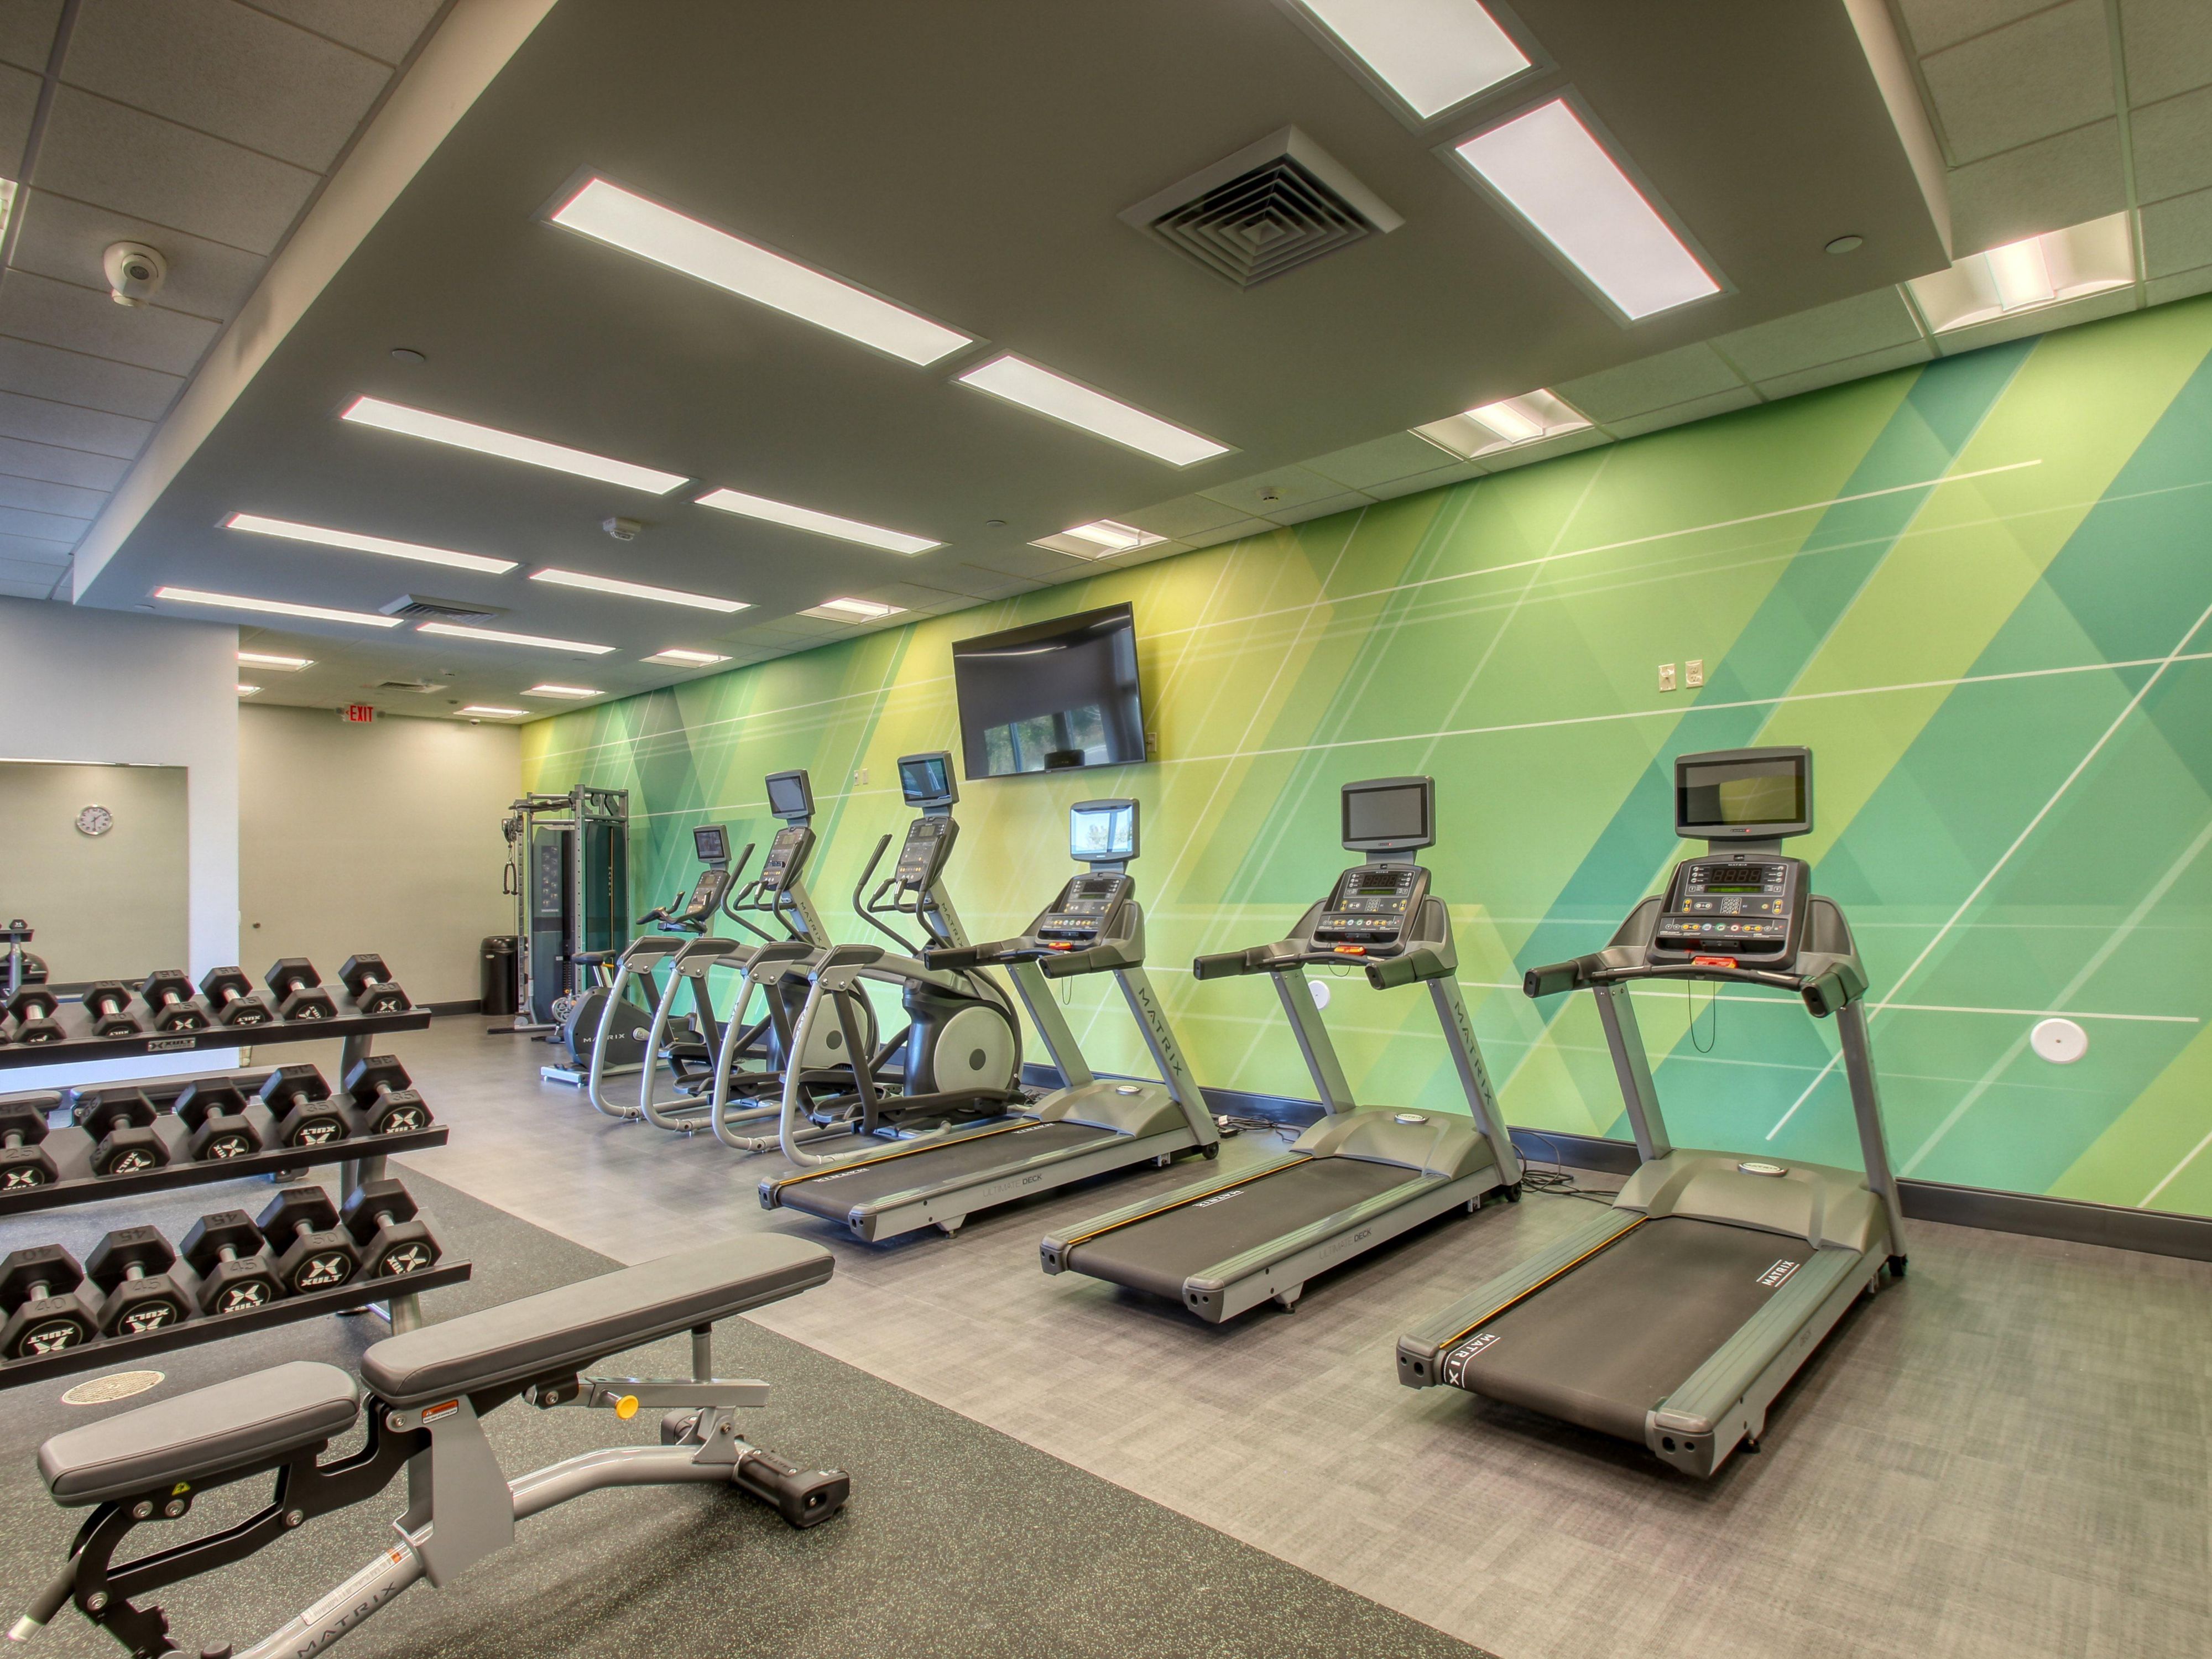 At nearly 1,000 square feet, our new Fitness Center has the space and modern equipment to get you fit and the endorphins flowing! Treadmills, bike, elliptical, a universal system and hand weights are available. No restrictions in place for fully vaccinated individuals.